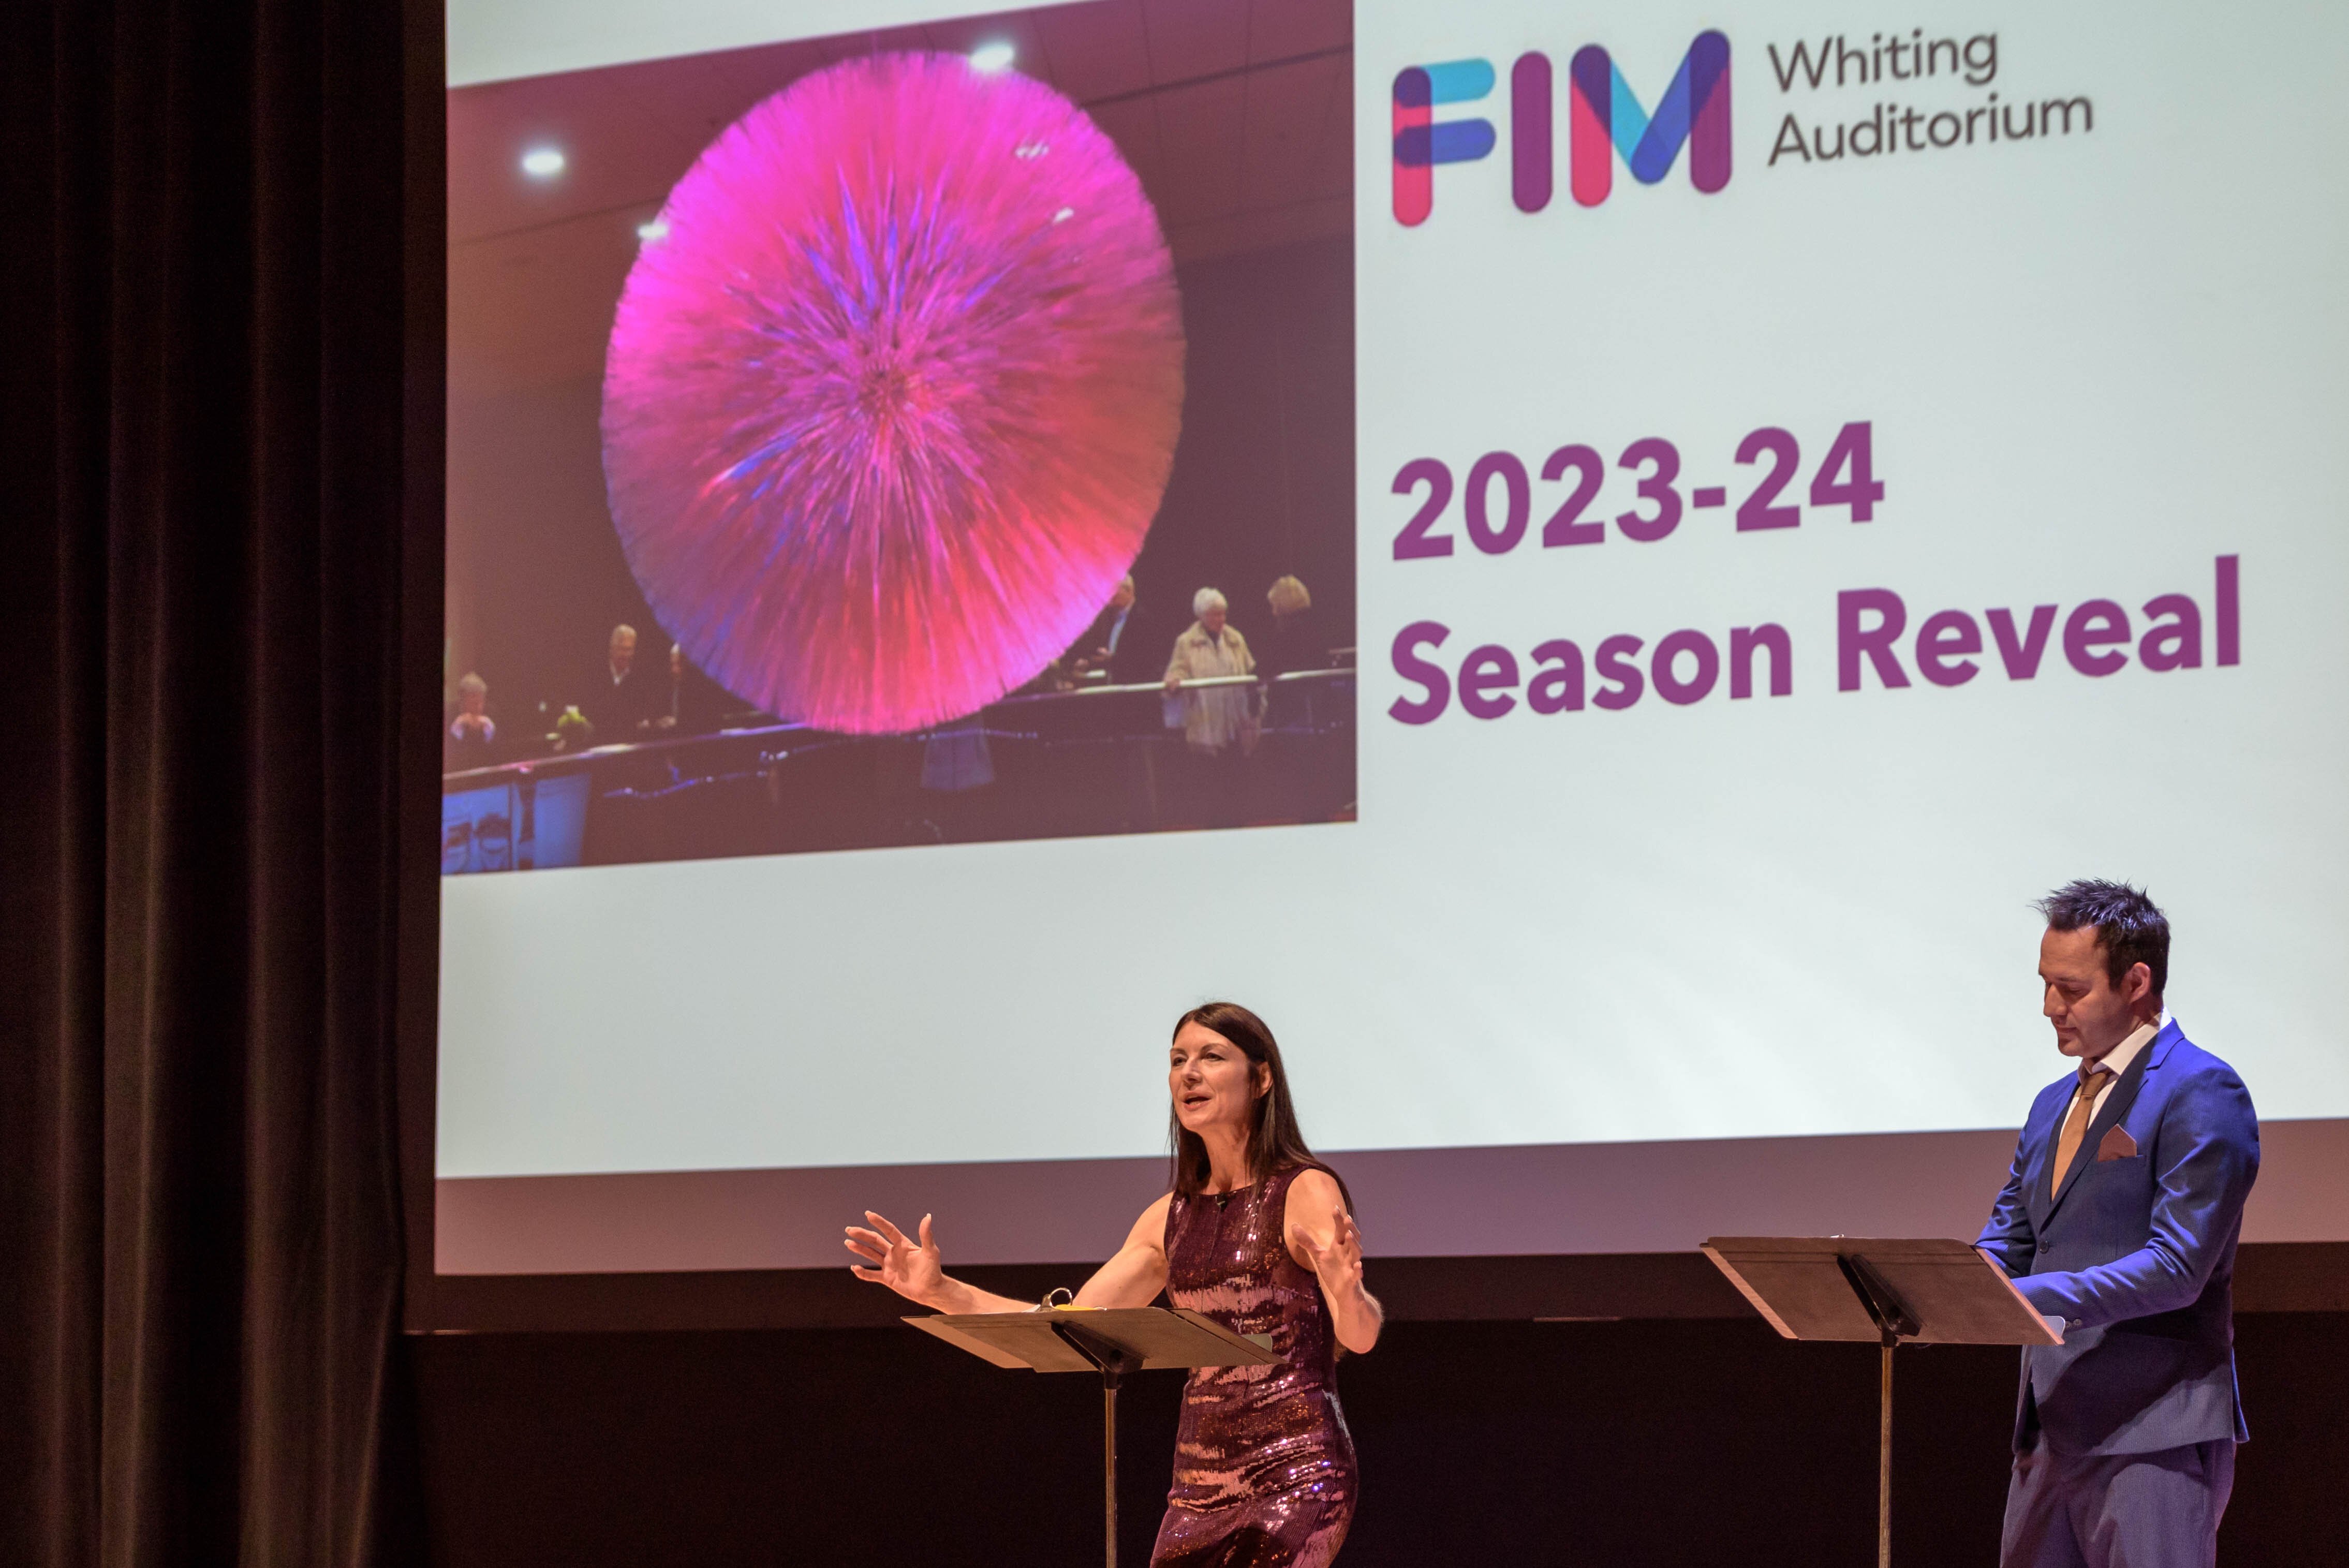 FIM has unveiled the lineup of shows for its upcoming 2023-2024 performing arts season, including a diverse range of live concerts, symphonies, world premieres, popular Broadway shows, and more.